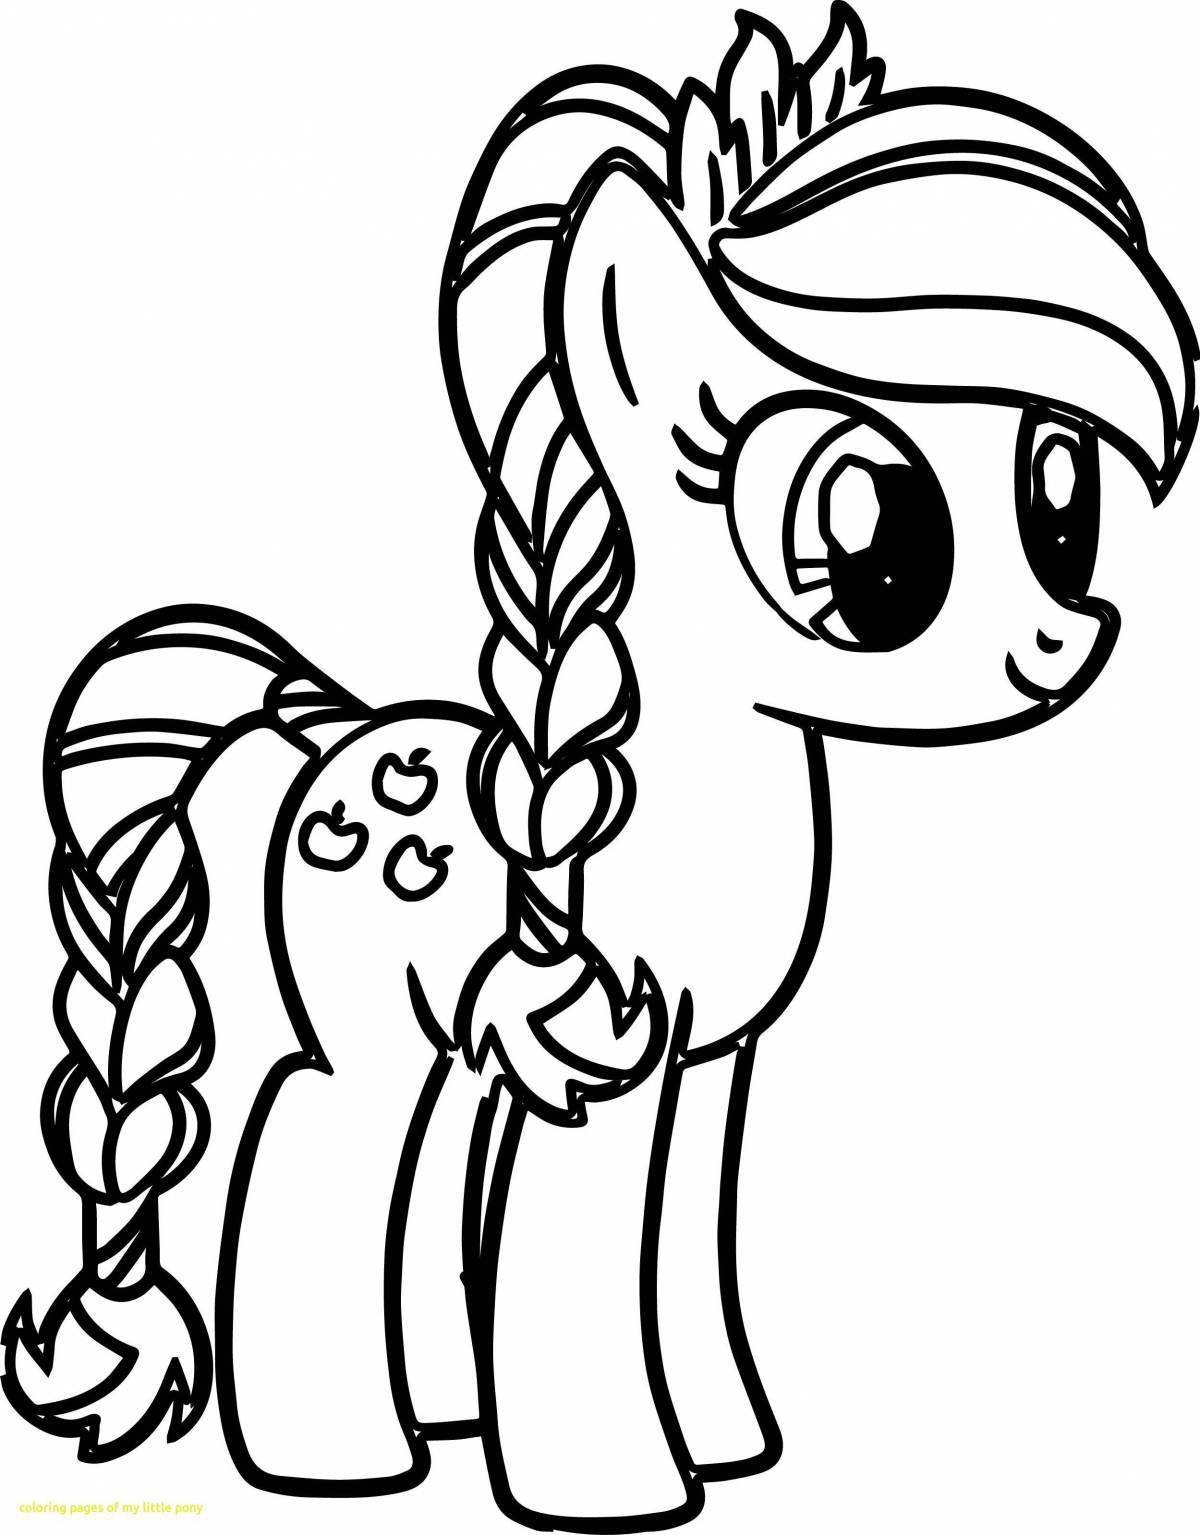 Adorable pony coloring pages for kids 5-6 years old